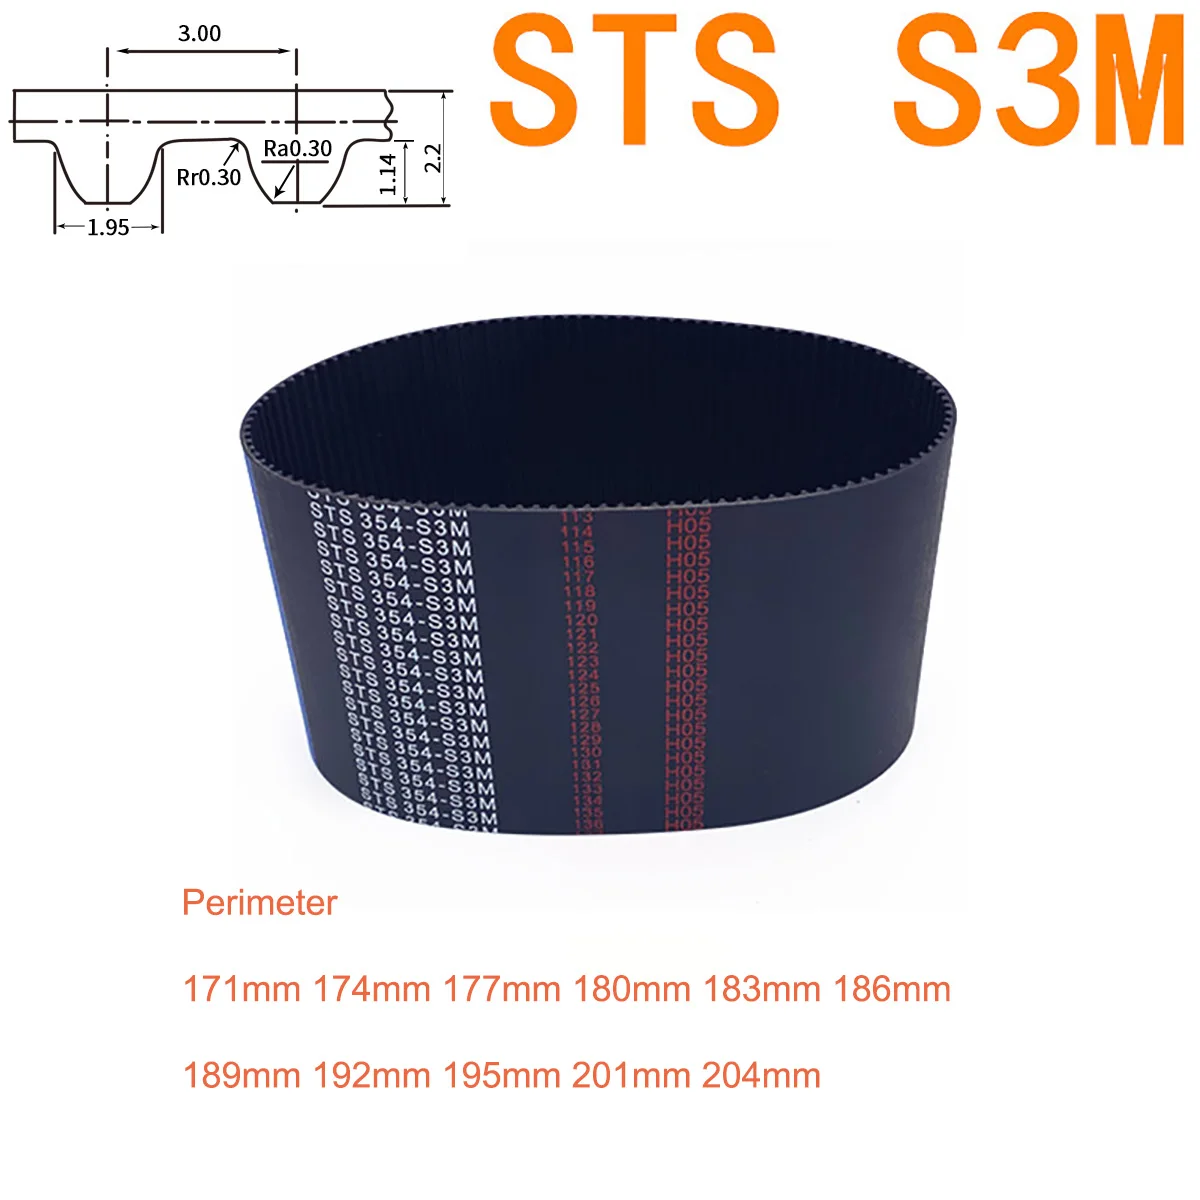 

1Pc S3M Timing Belt 171 174 177 180 183 186 189 192 195 201 204mm Width 6/10/15/20mm STS S3M Closed-loop Synchronous Rubber Belt